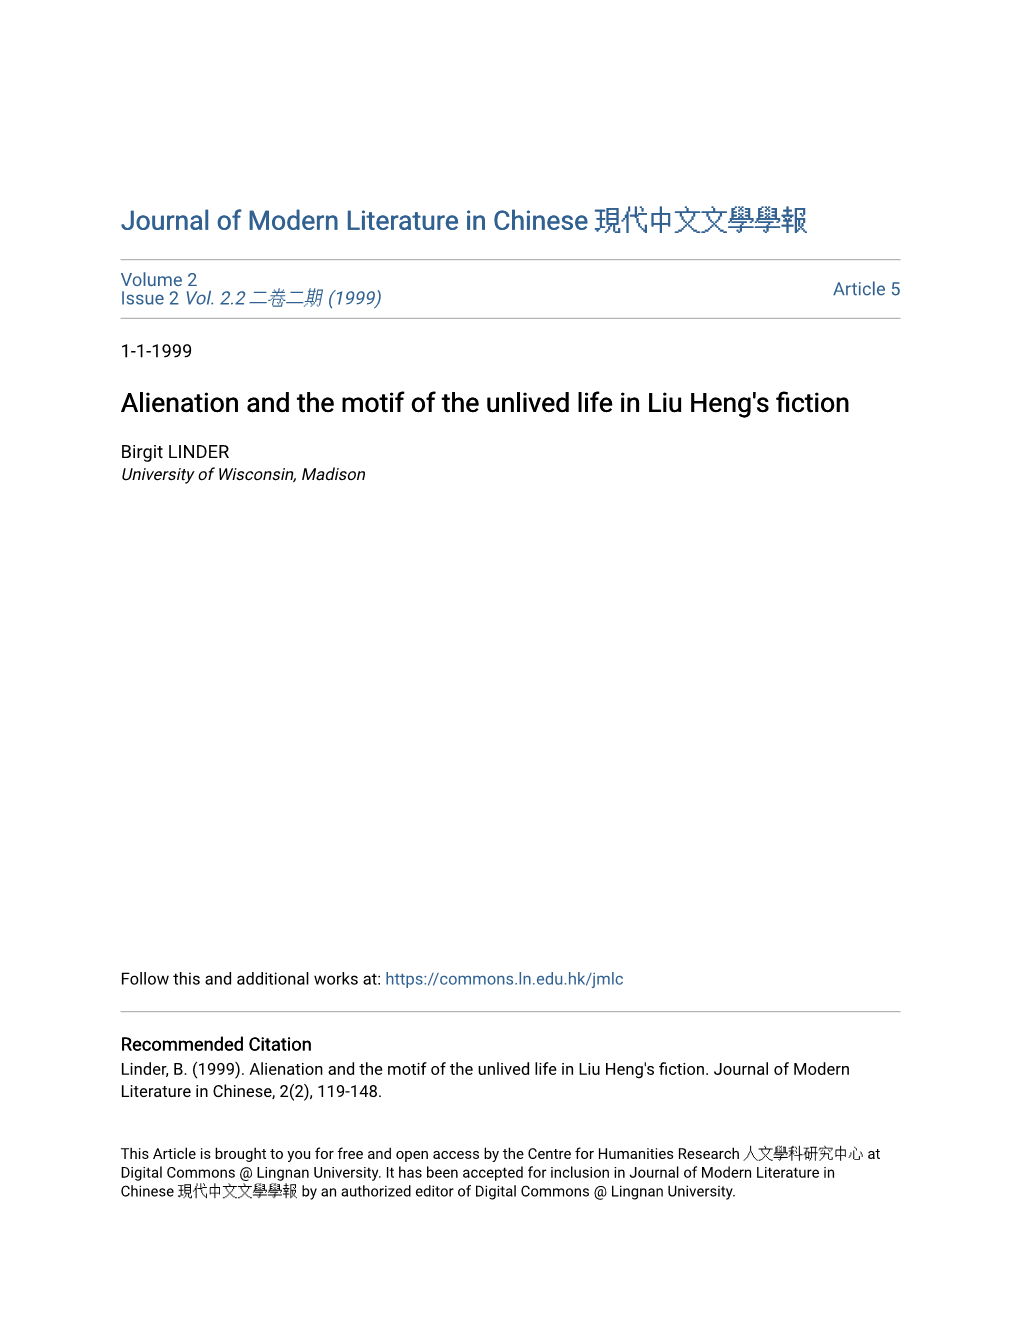 Alienation and the Motif of the Unlived Life in Liu Heng's Fiction